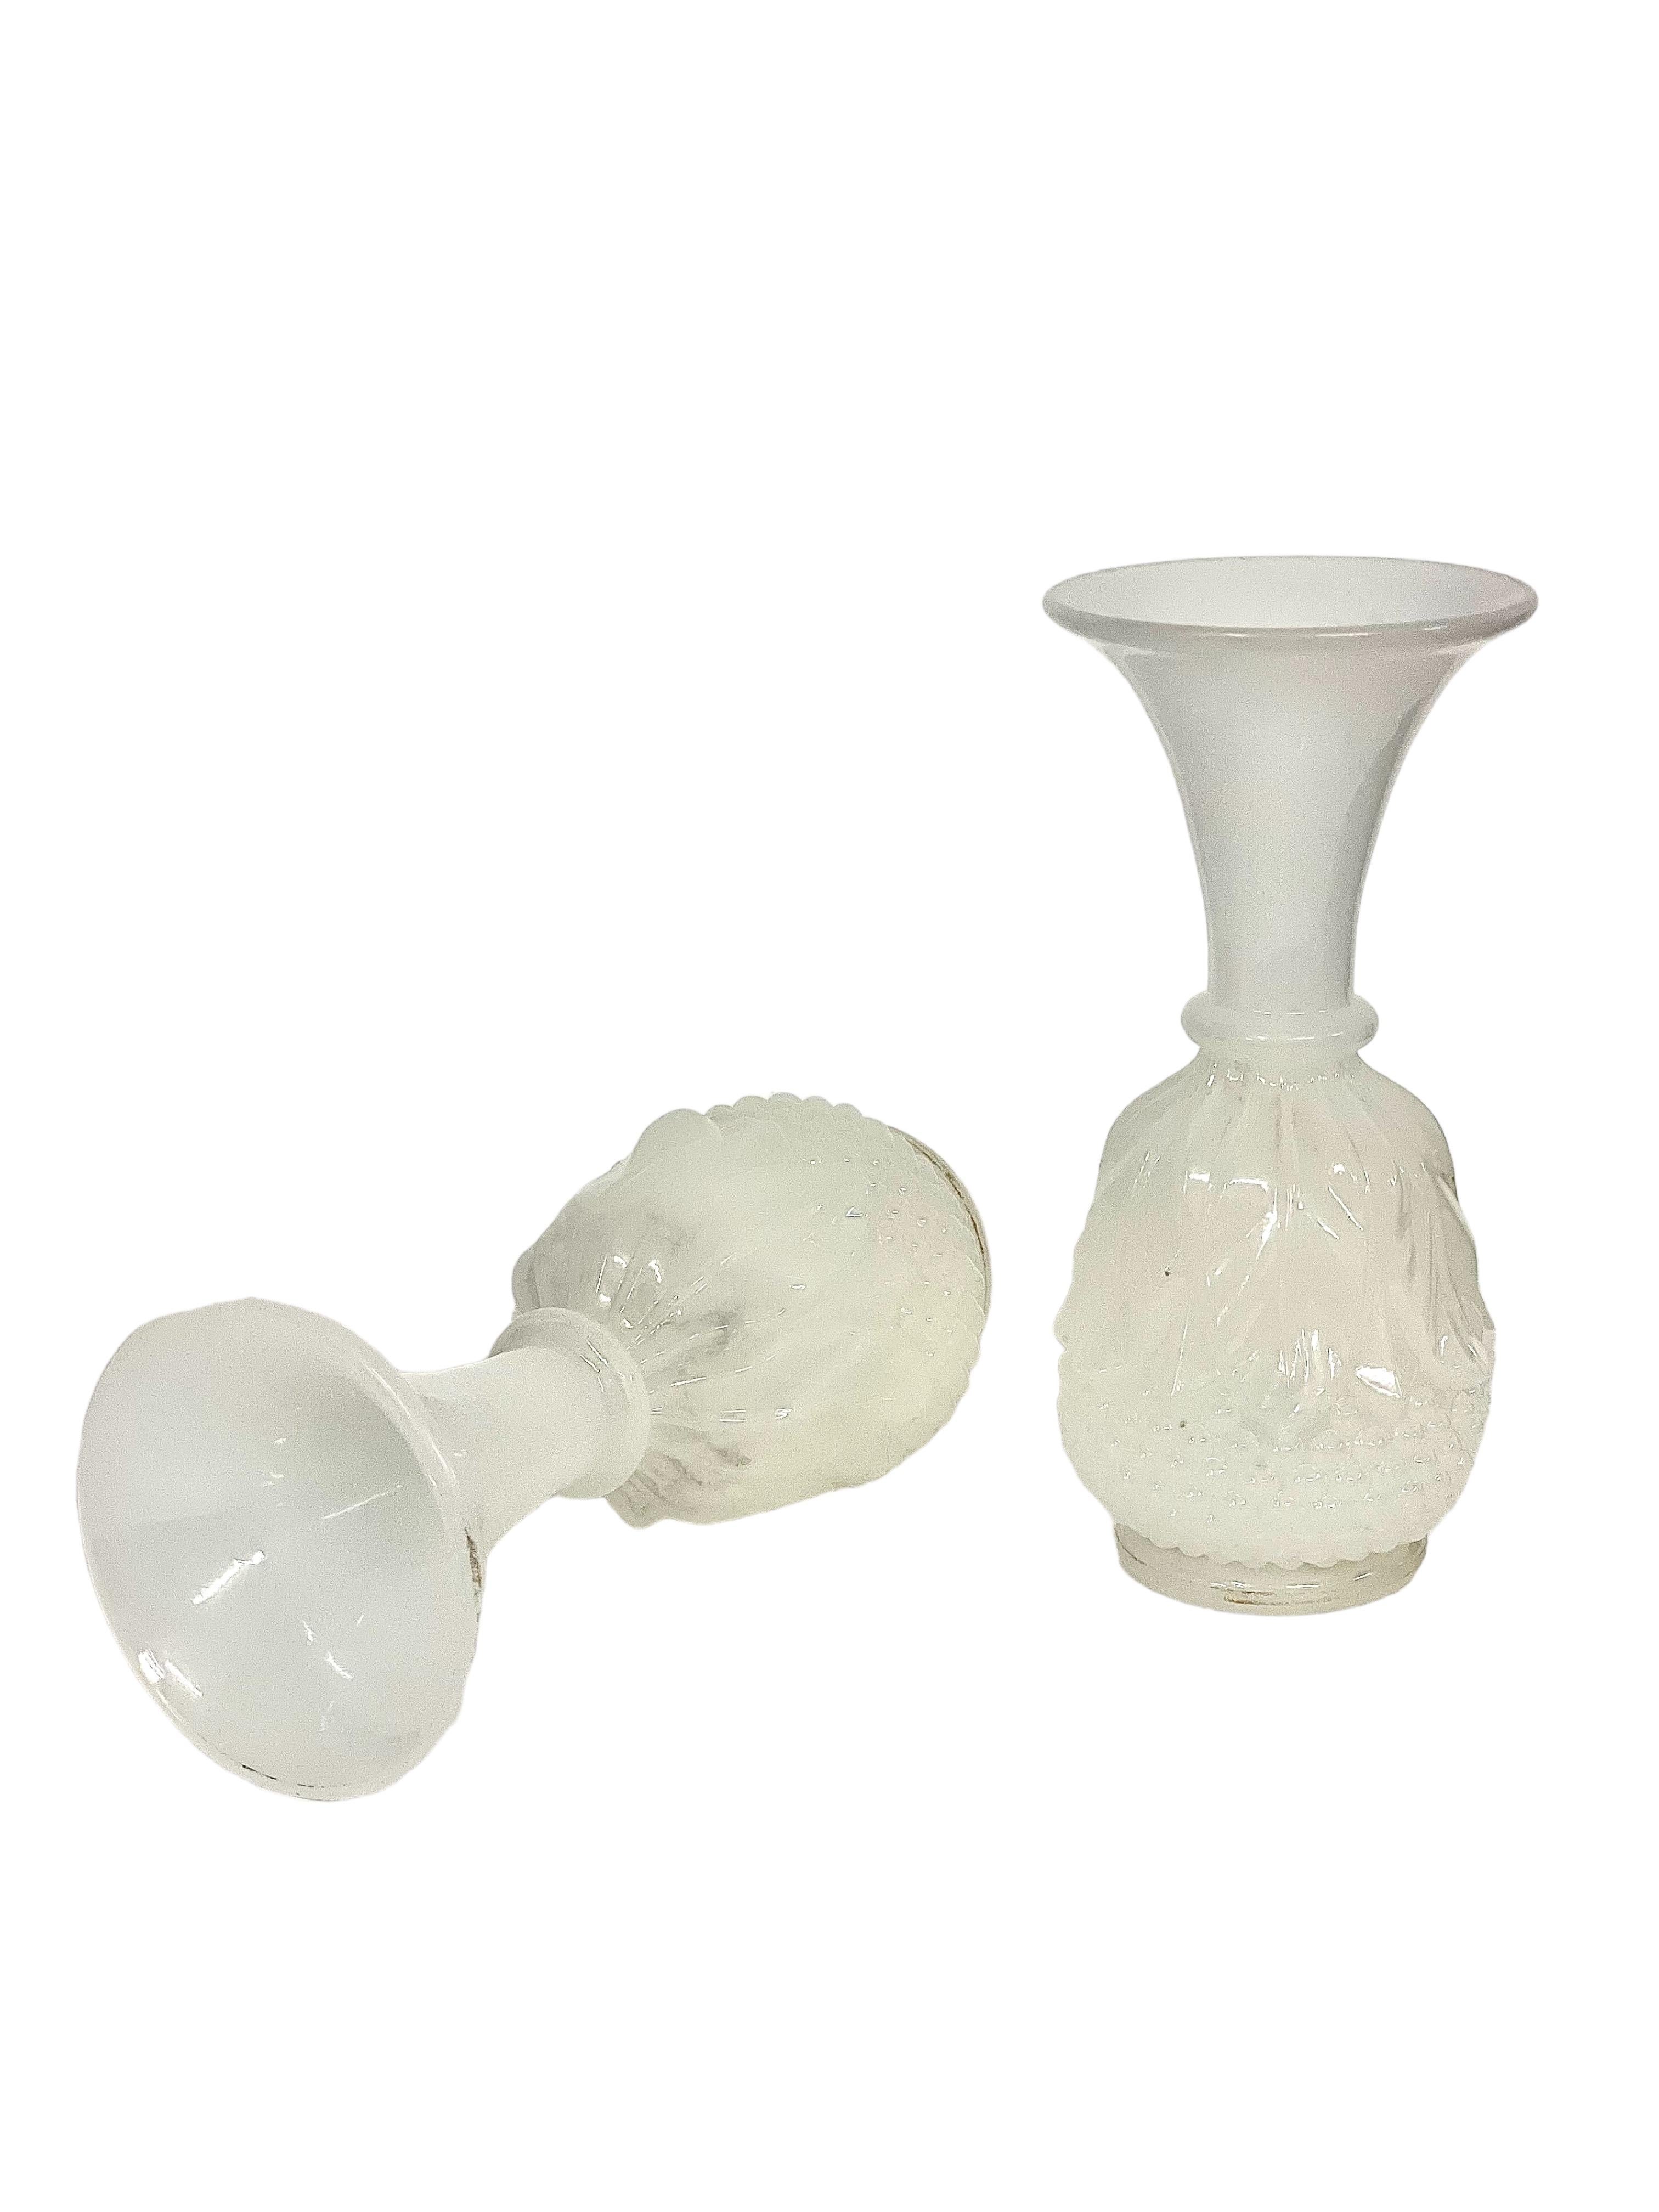 A very attractive pair of matching white 'soapy' opaline antique French vases, dating from the Napoleon III period (mid-19th century) and each beautifully modelled with a pronounced 'trumpet' shaped neck. The body of each vase is decorated with a